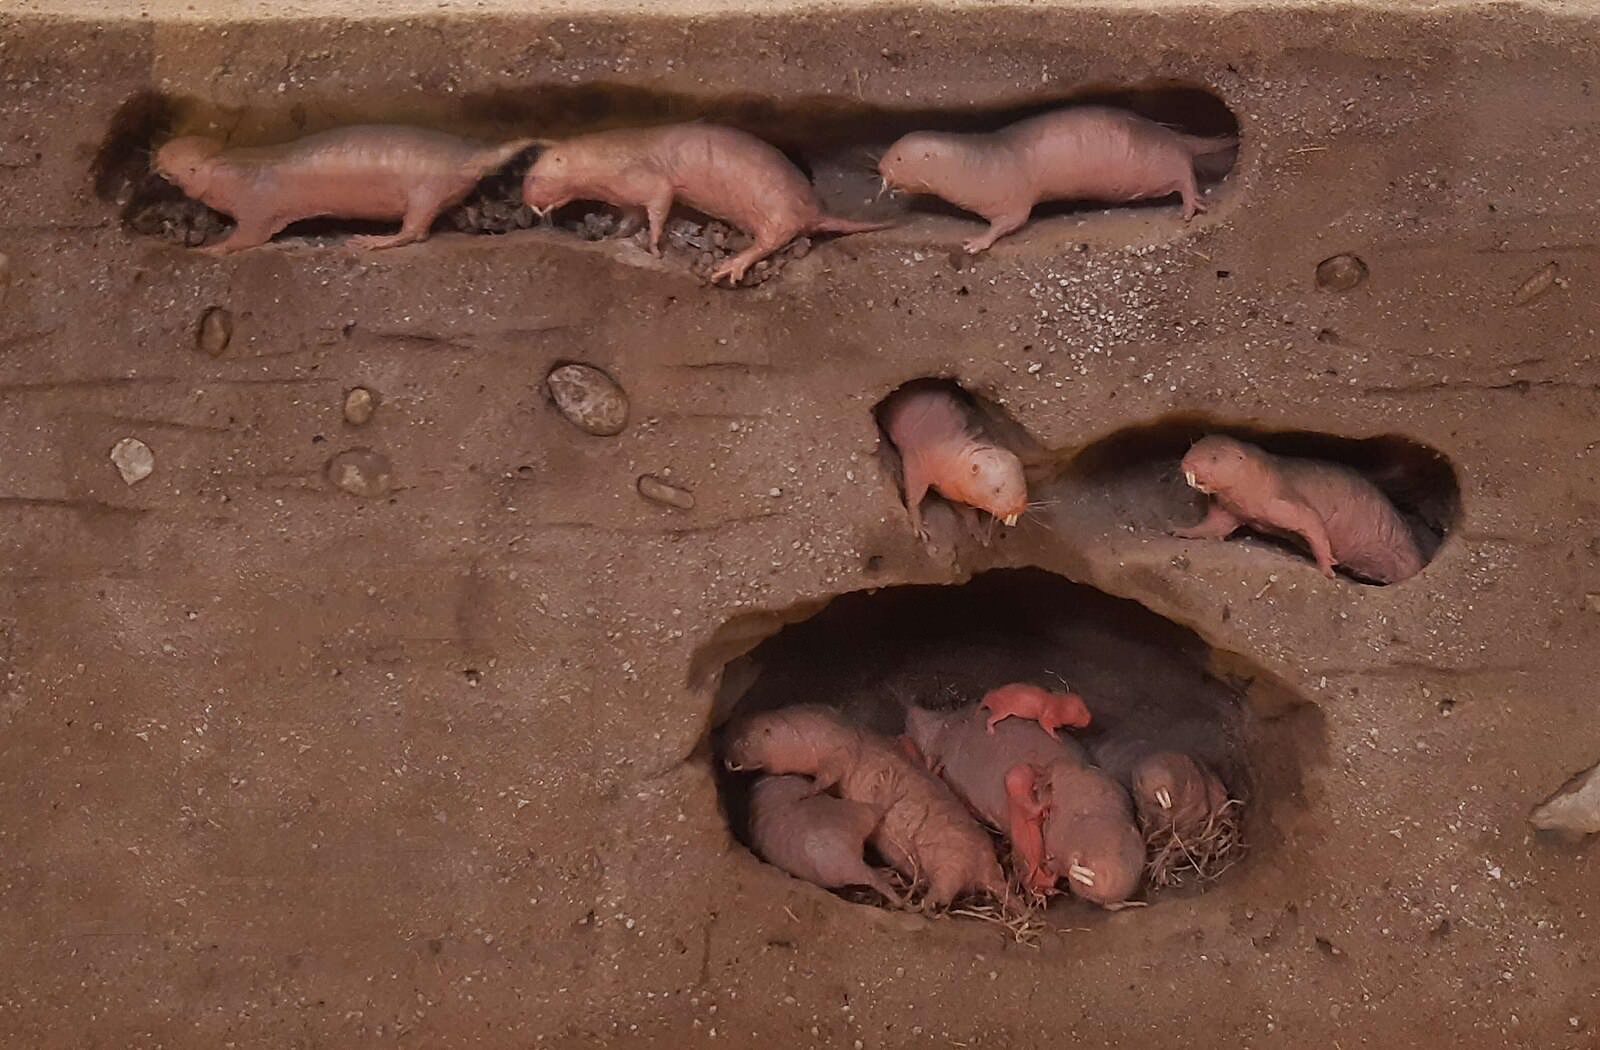 Naked mole rats have an extraordinary ability to resist cancer. Scientists have discovered that a sugar called hyaluronan in their bodies helps prevent tumor growth, making them a valuable subject in cancer research.